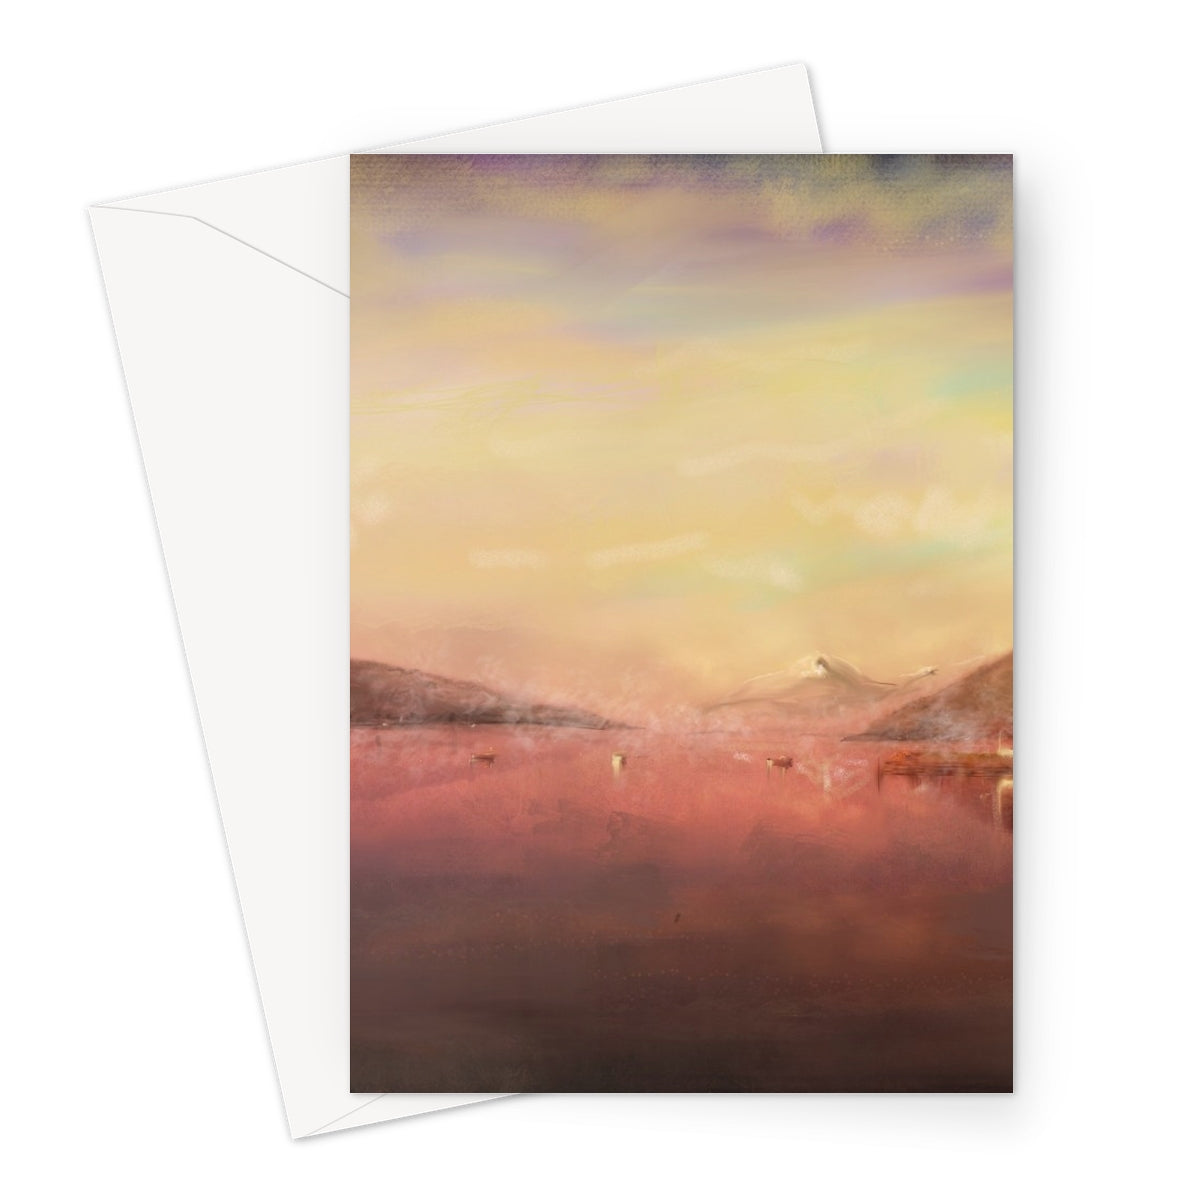 Loch Tay Art Gifts Greeting Card-Stationery-Scottish Lochs & Mountains Art Gallery-A5 Portrait-1 Card-Paintings, Prints, Homeware, Art Gifts From Scotland By Scottish Artist Kevin Hunter